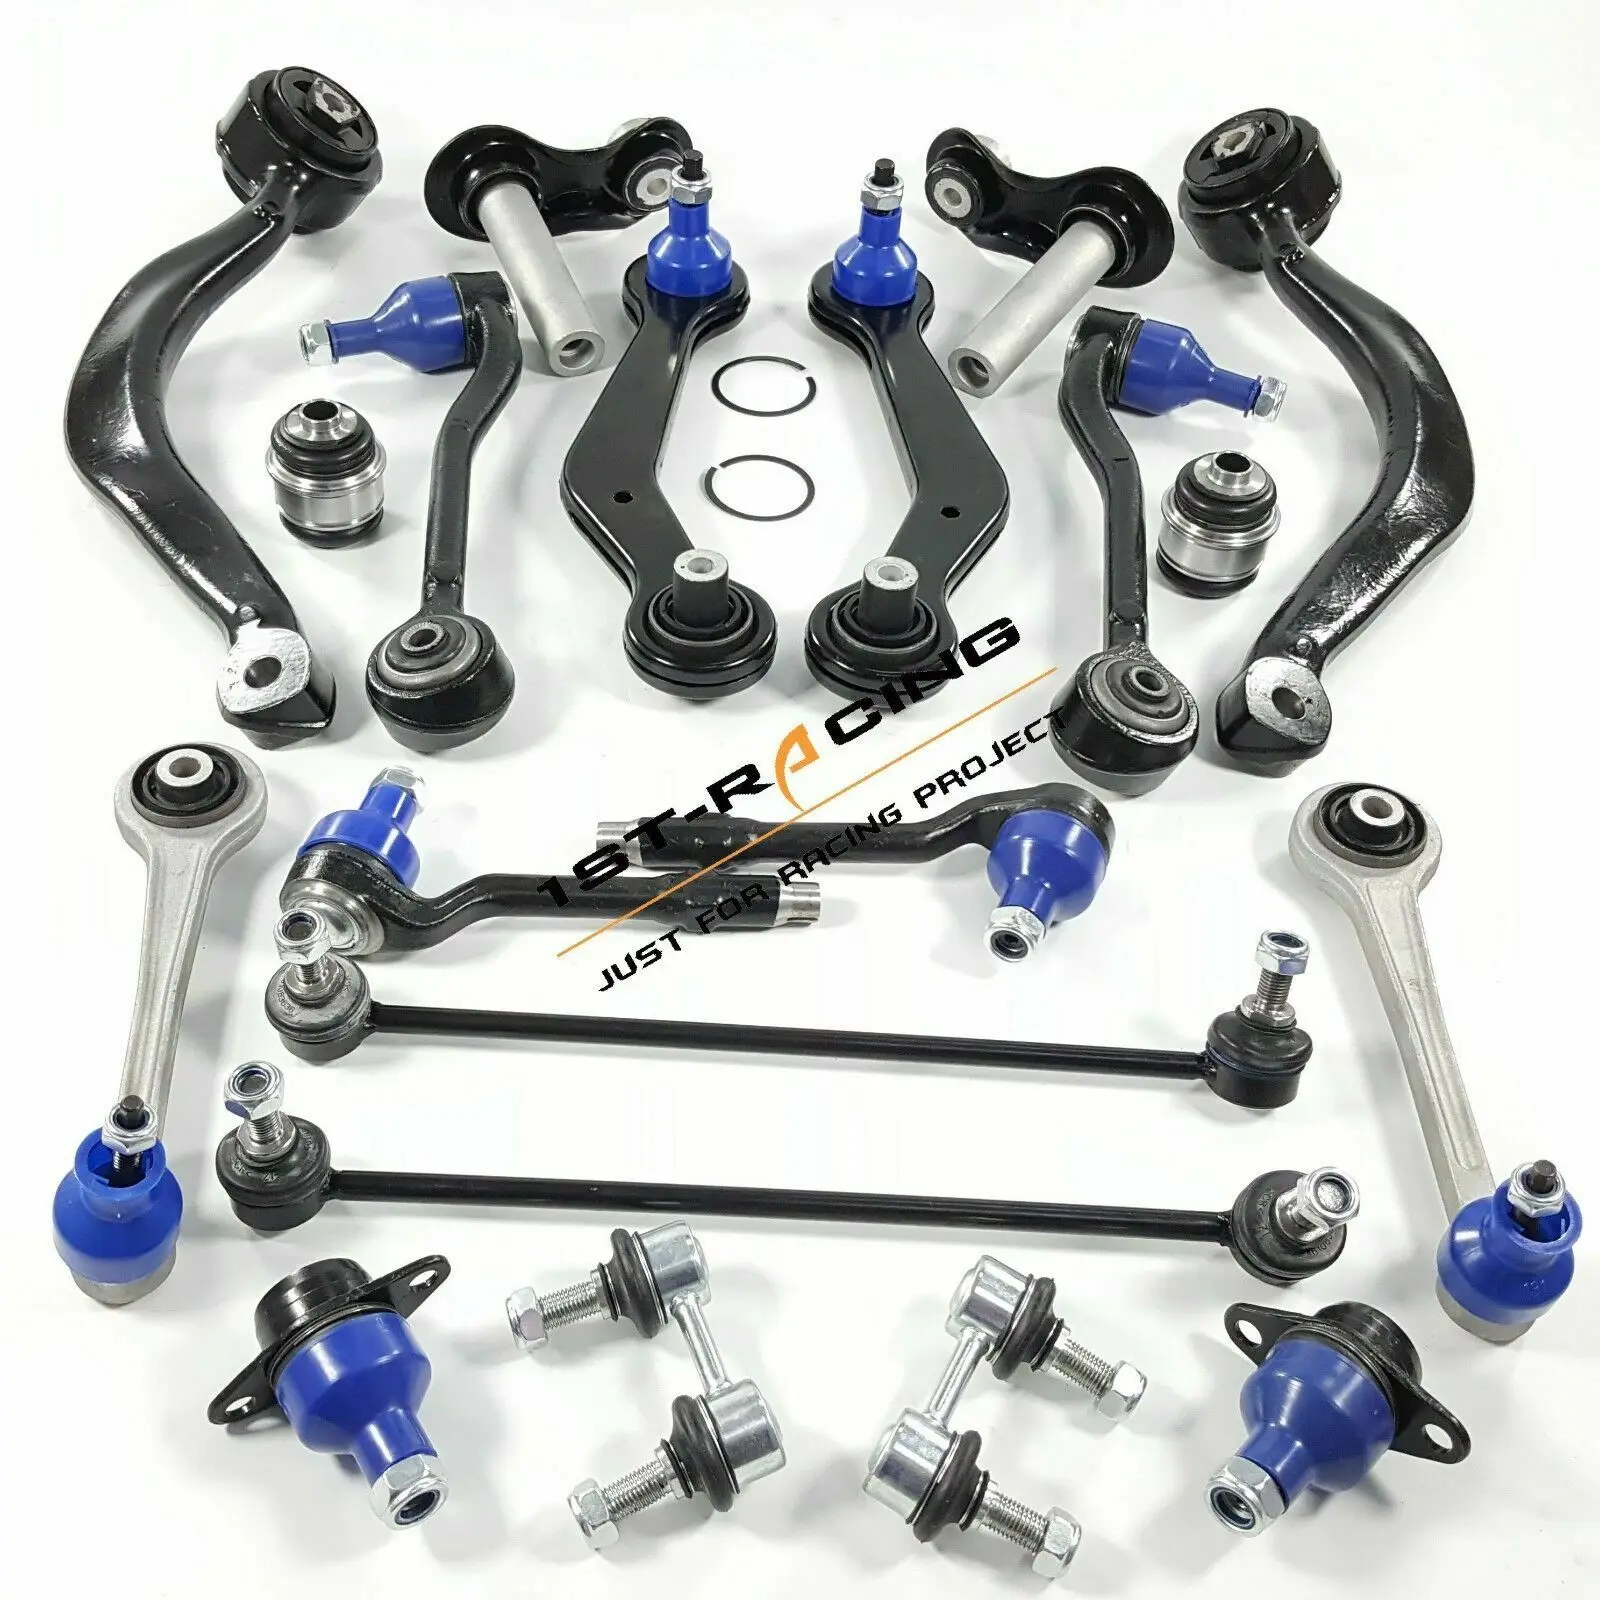 BMW X5 E53 3.0 4.4 4.6 4.8 3.0D FRONT SUSPENSION WISHBONE ARMS ARM KIT LINKS HD 